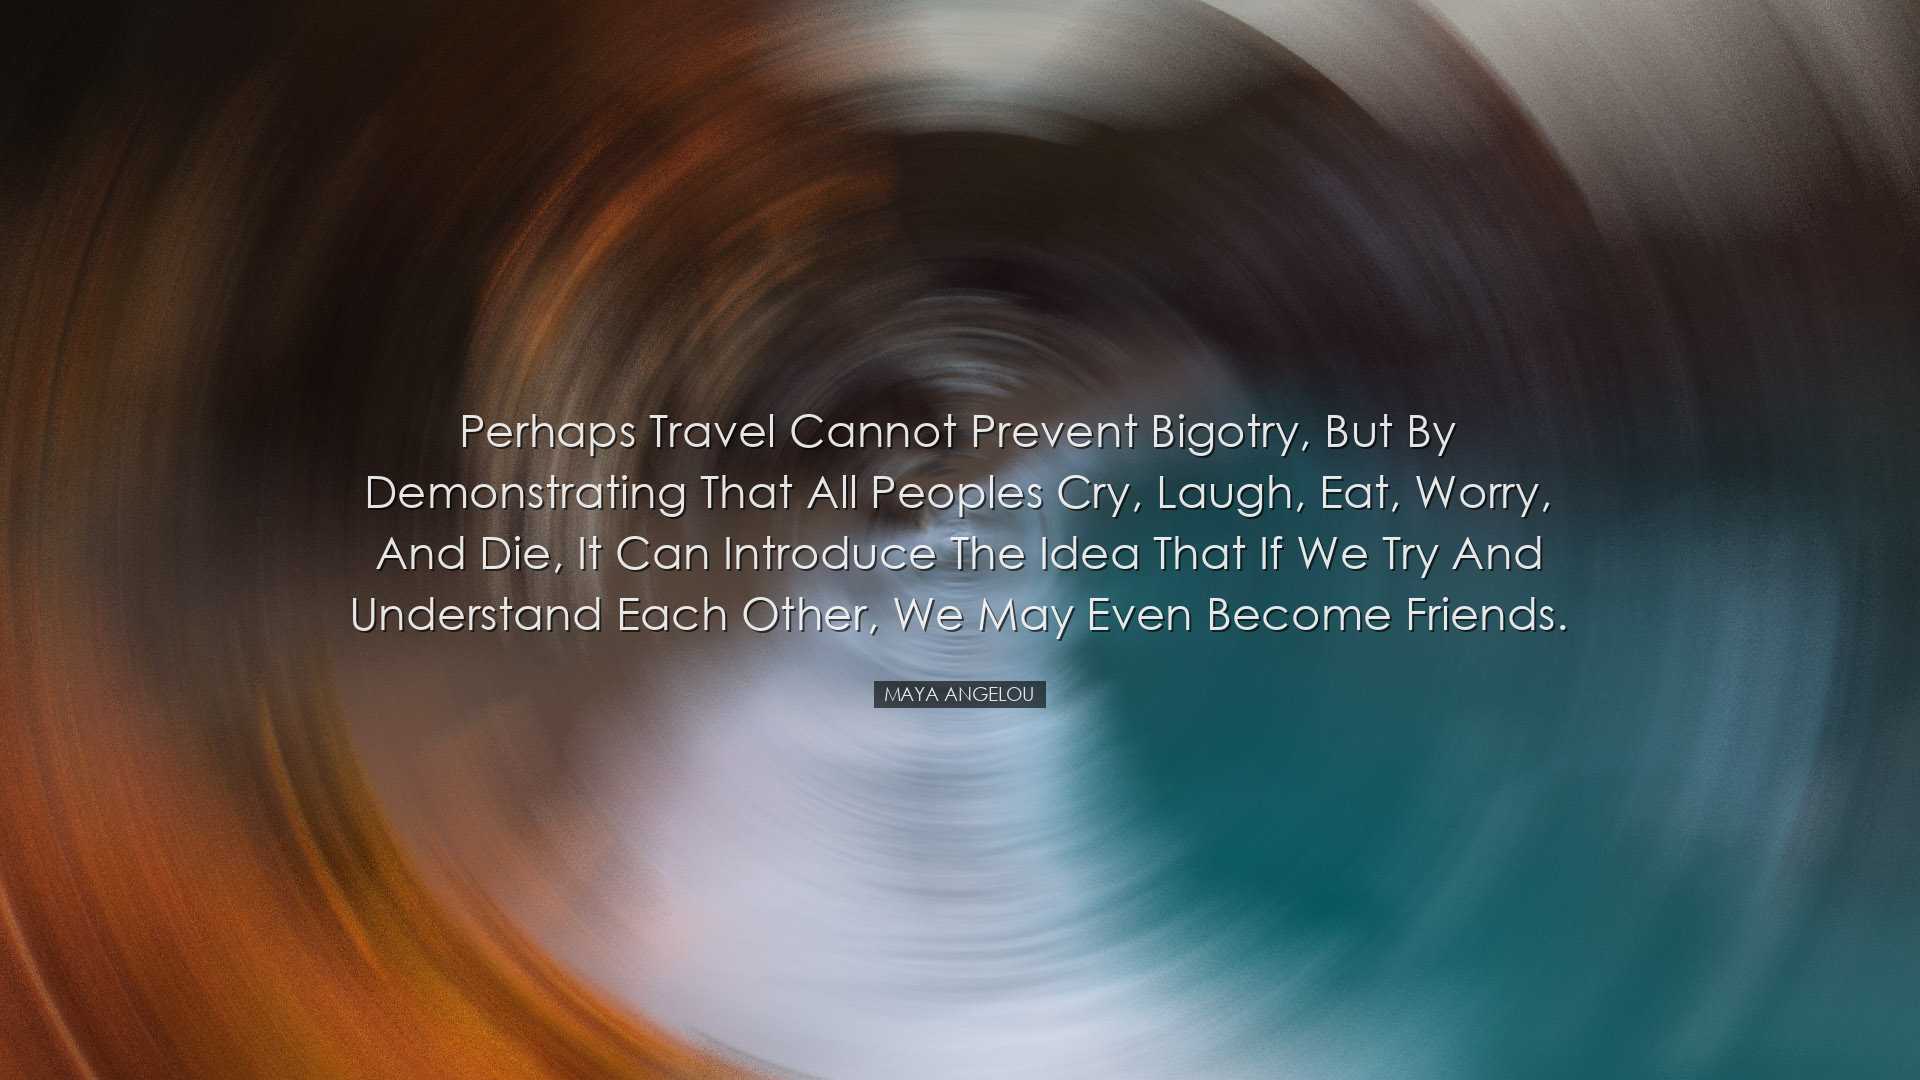 Perhaps travel cannot prevent bigotry, but by demonstrating that a